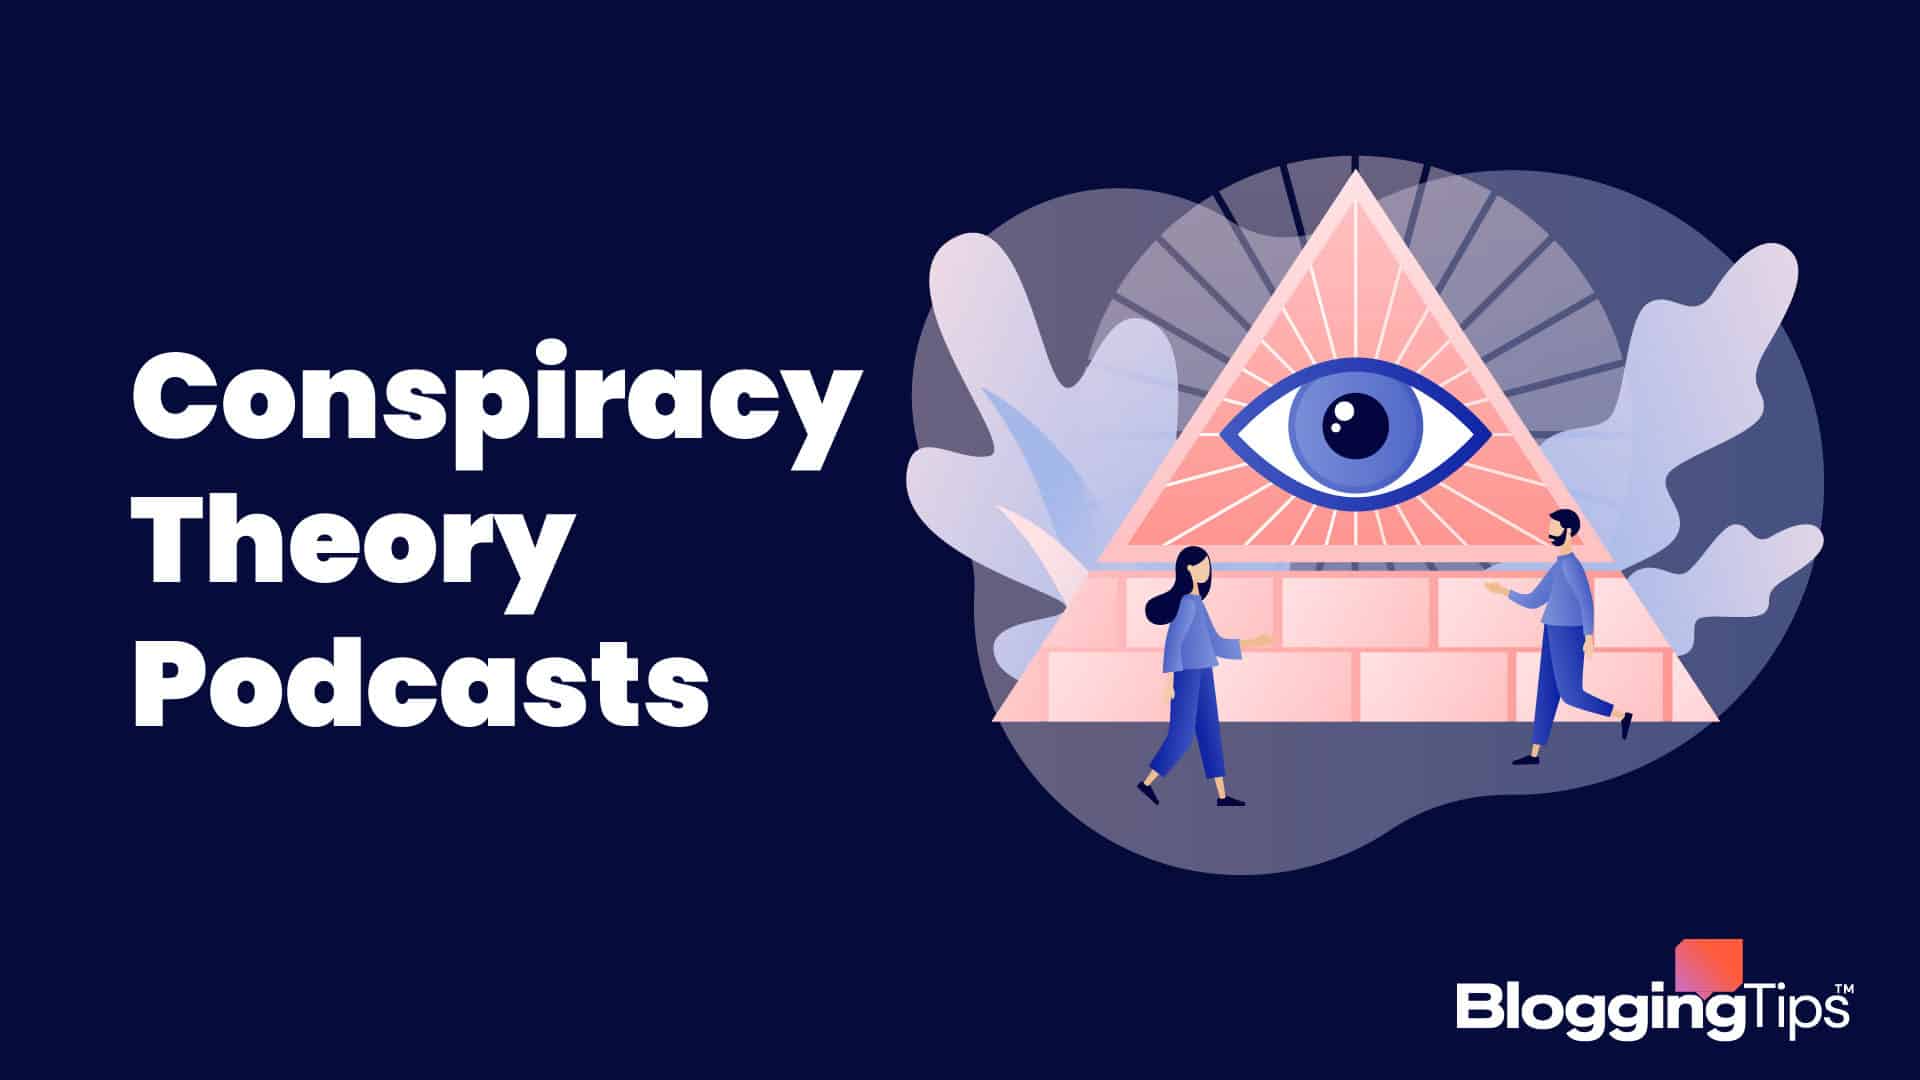 vector graphic showing an illustration of conspiracy theories related to story books with the big block text 